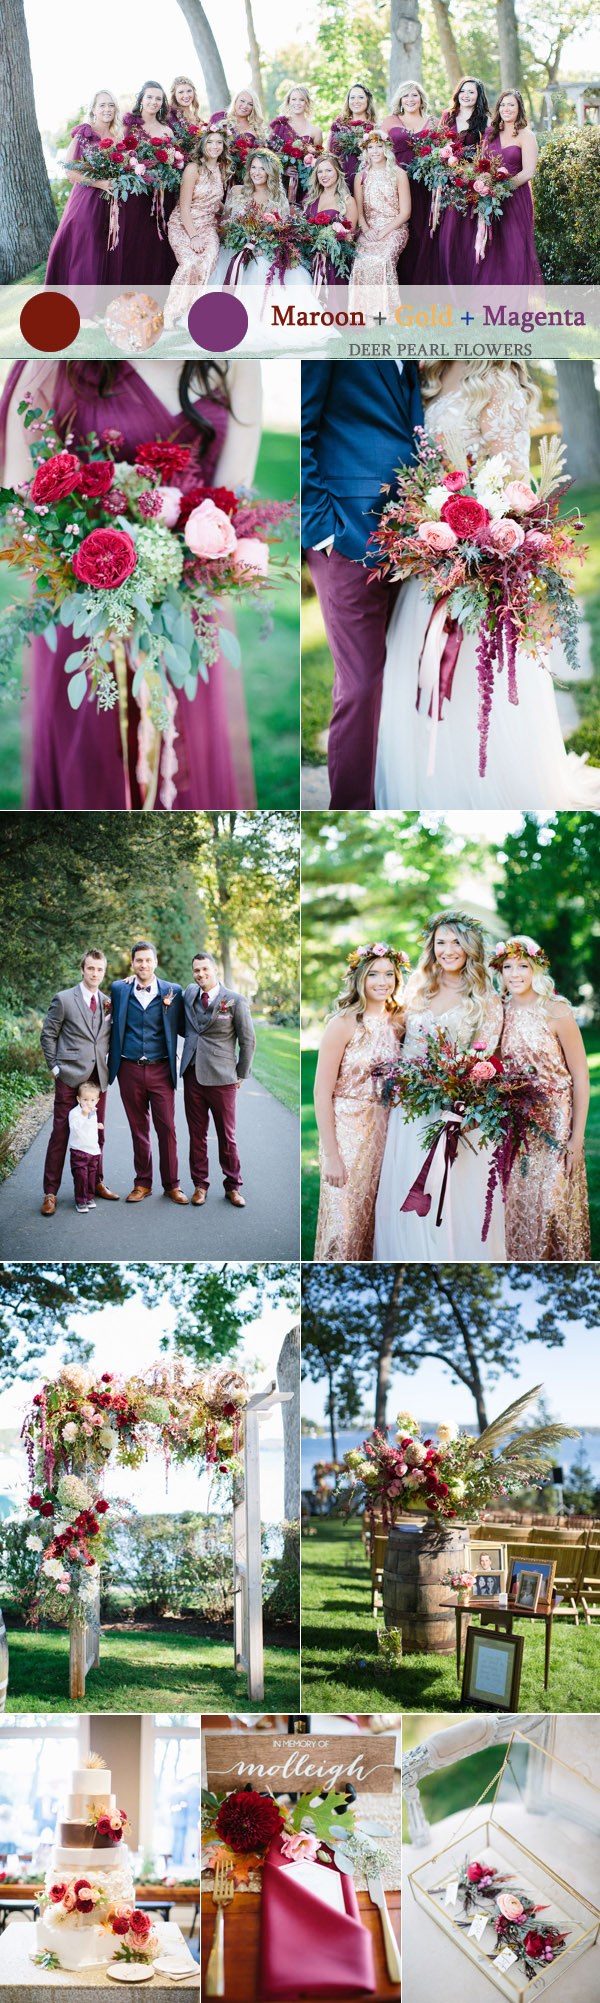 Maroon gold and magent purple fall wedding color ideas